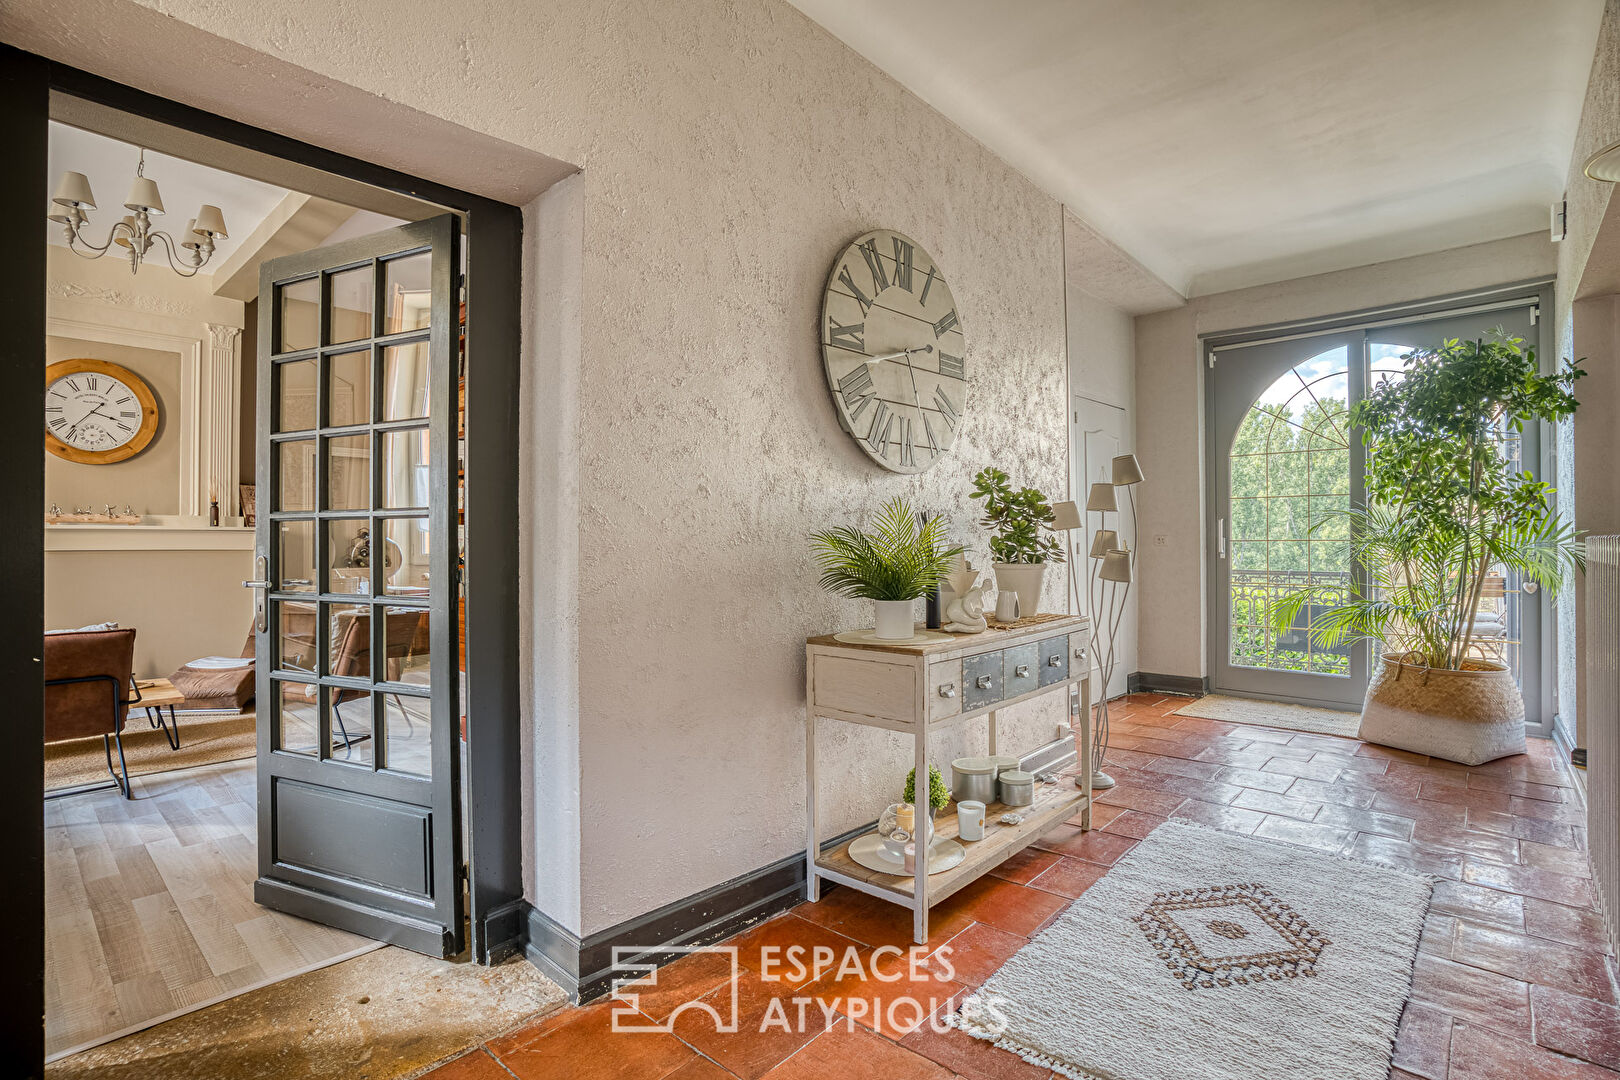 Elegant bourgeois house in the heart of a bastide